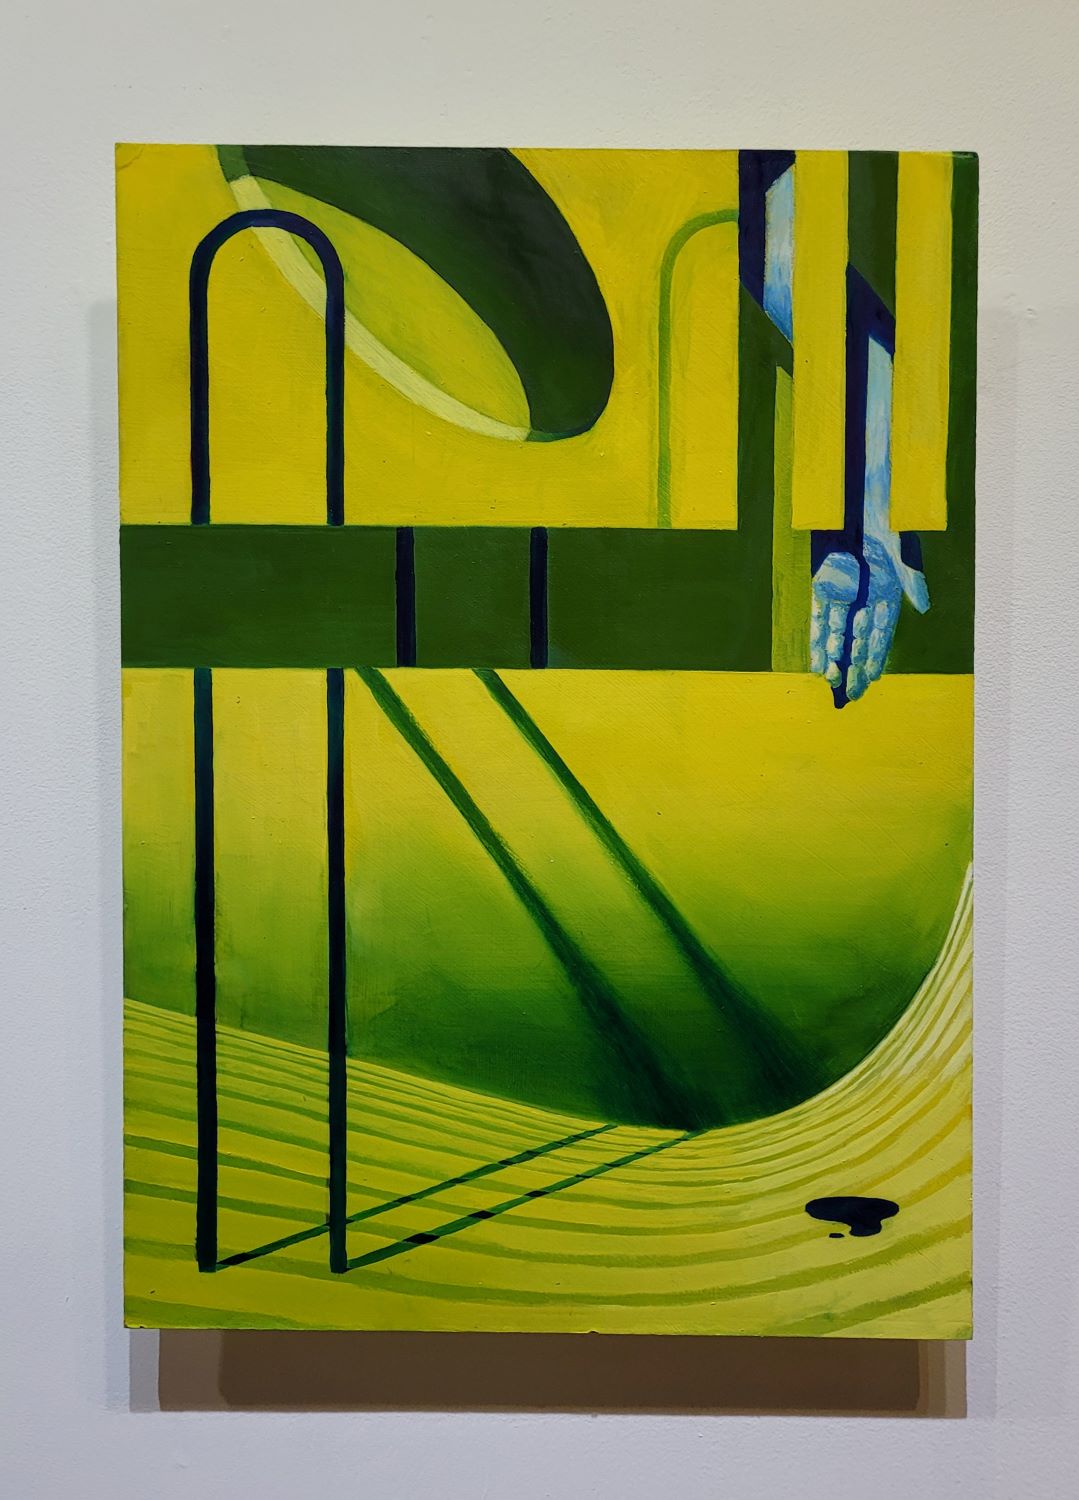 Medium-sized painting of surreal yellow space with a blue hand and black arch, the back of the painting glows yellow. 